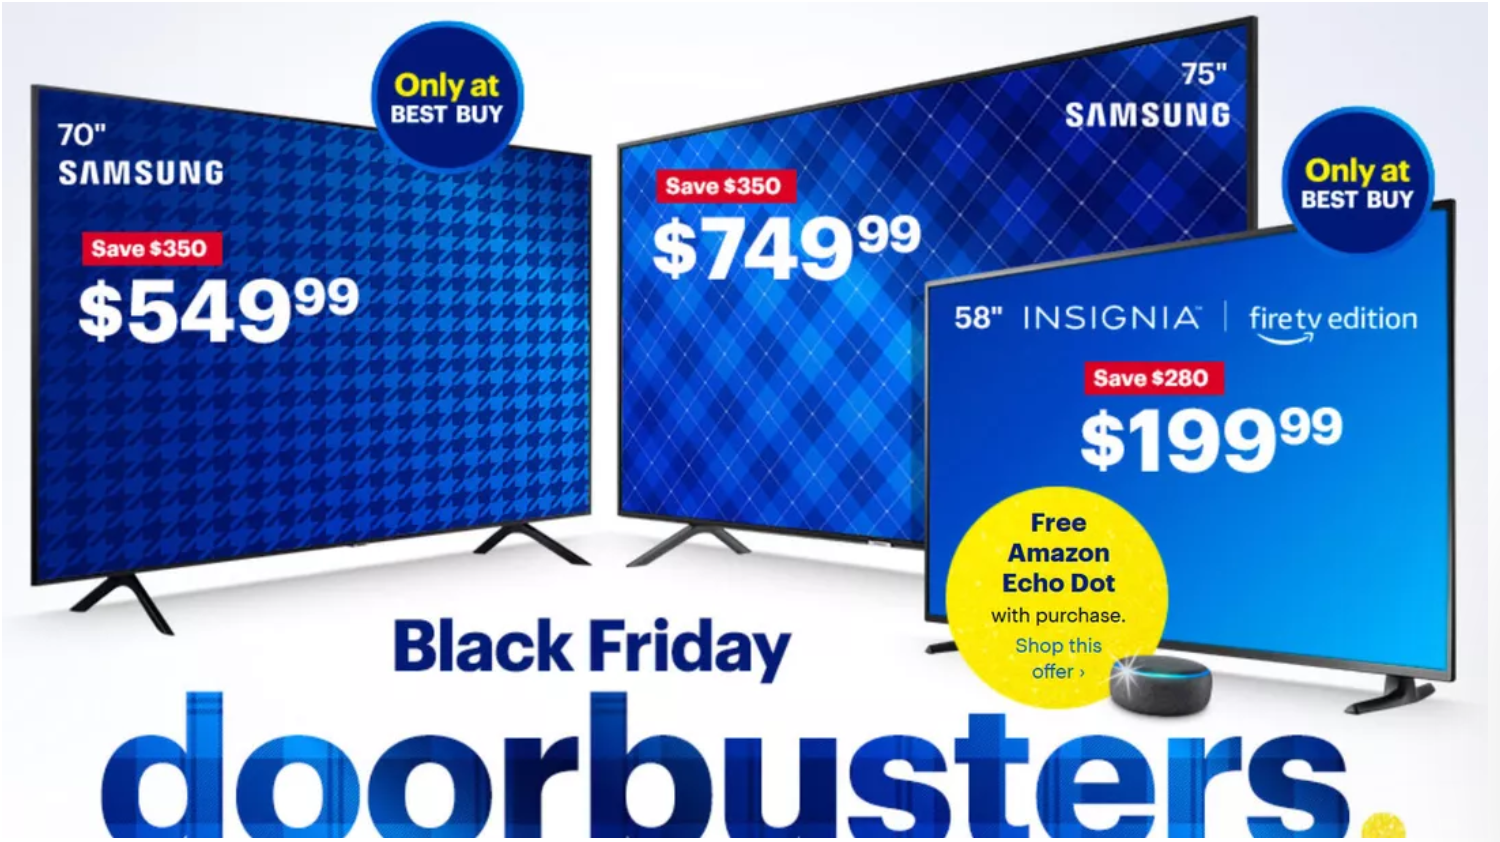 Best Buy Black Friday 2019 ad: Everything Going on Sale Next Week